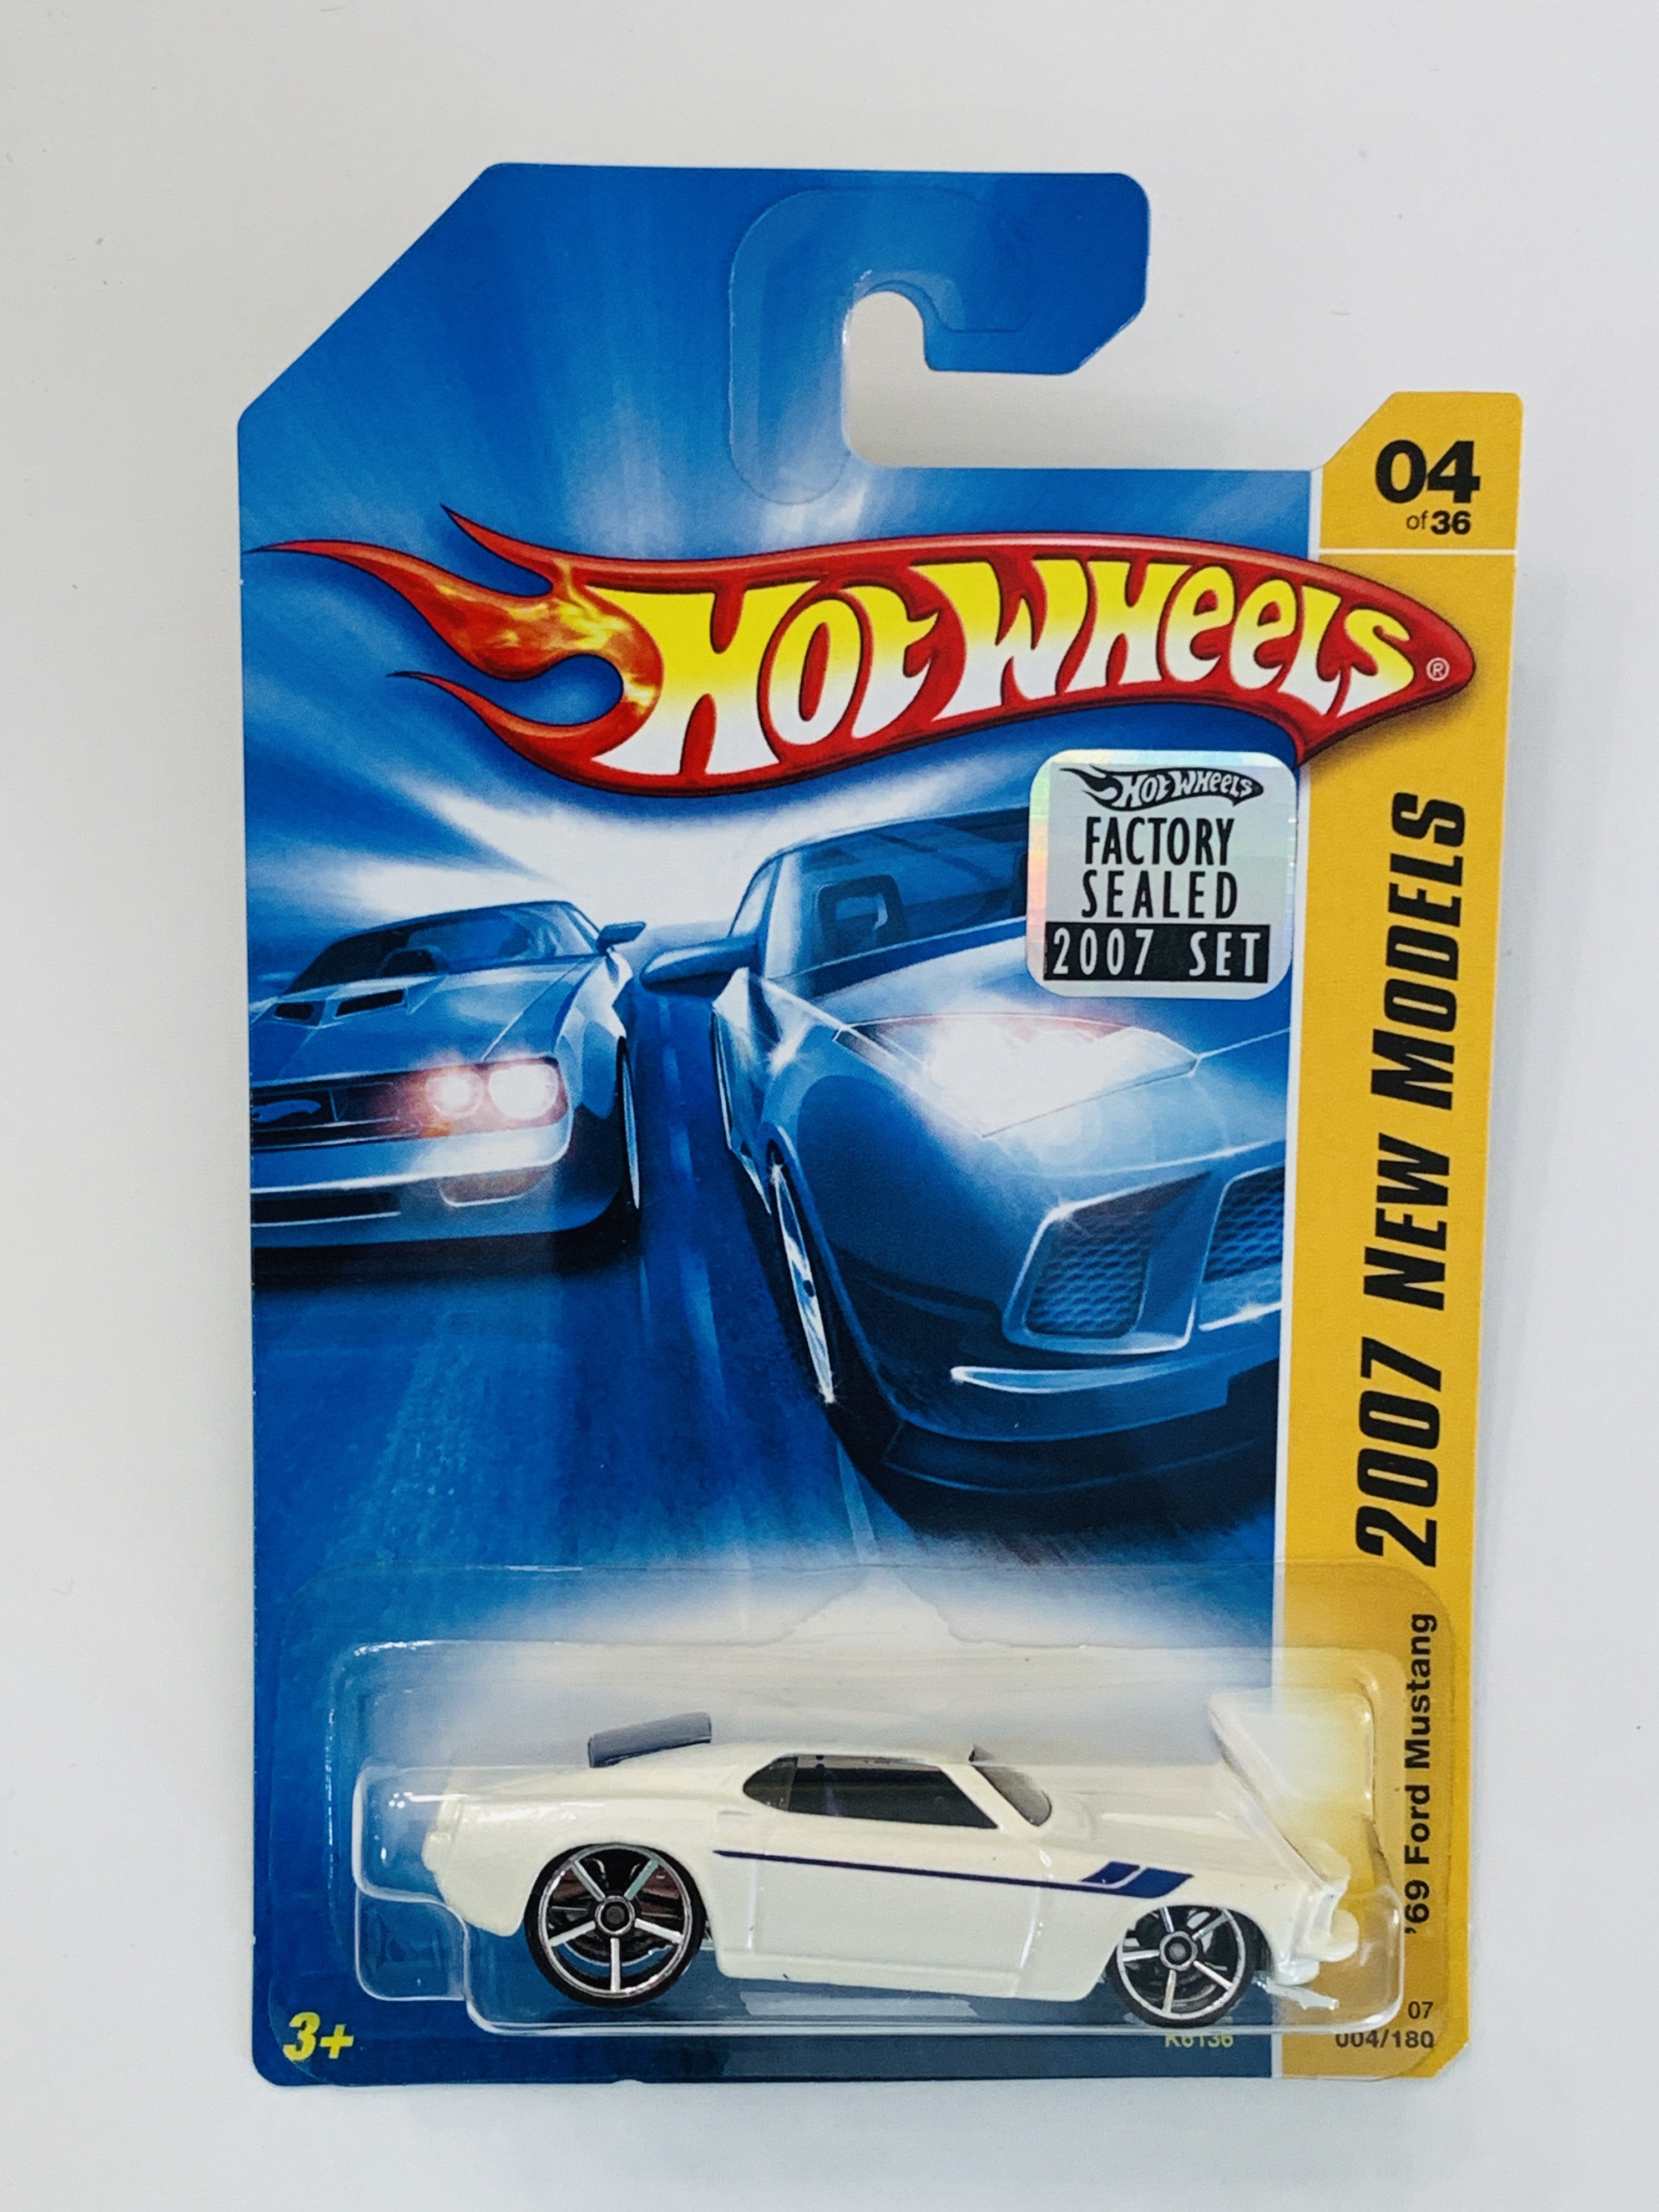 Hot Wheels 2007 Factory Set #004 '69 Ford Mustang - White